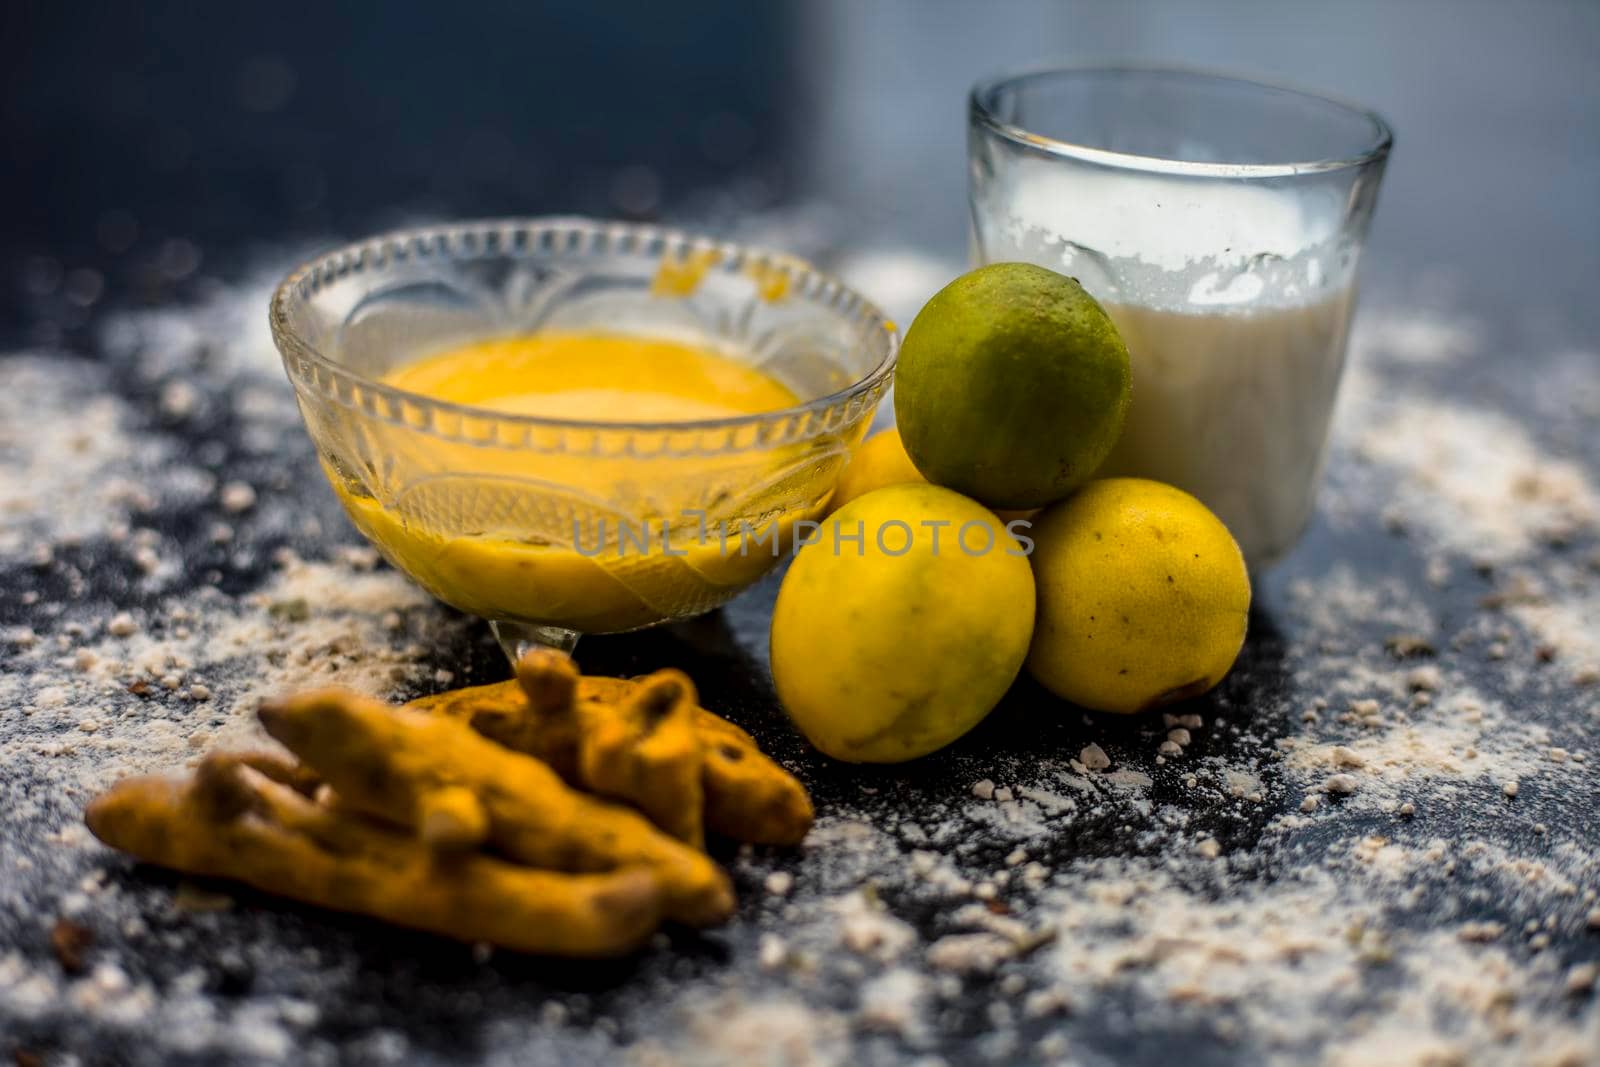 Lemon face mask on the wooden surface consisting lemon juice, gram flour or chickpea flour, turmeric or Haldi and milk in a glass bowl.For the treatment of tans. by mirzamlk